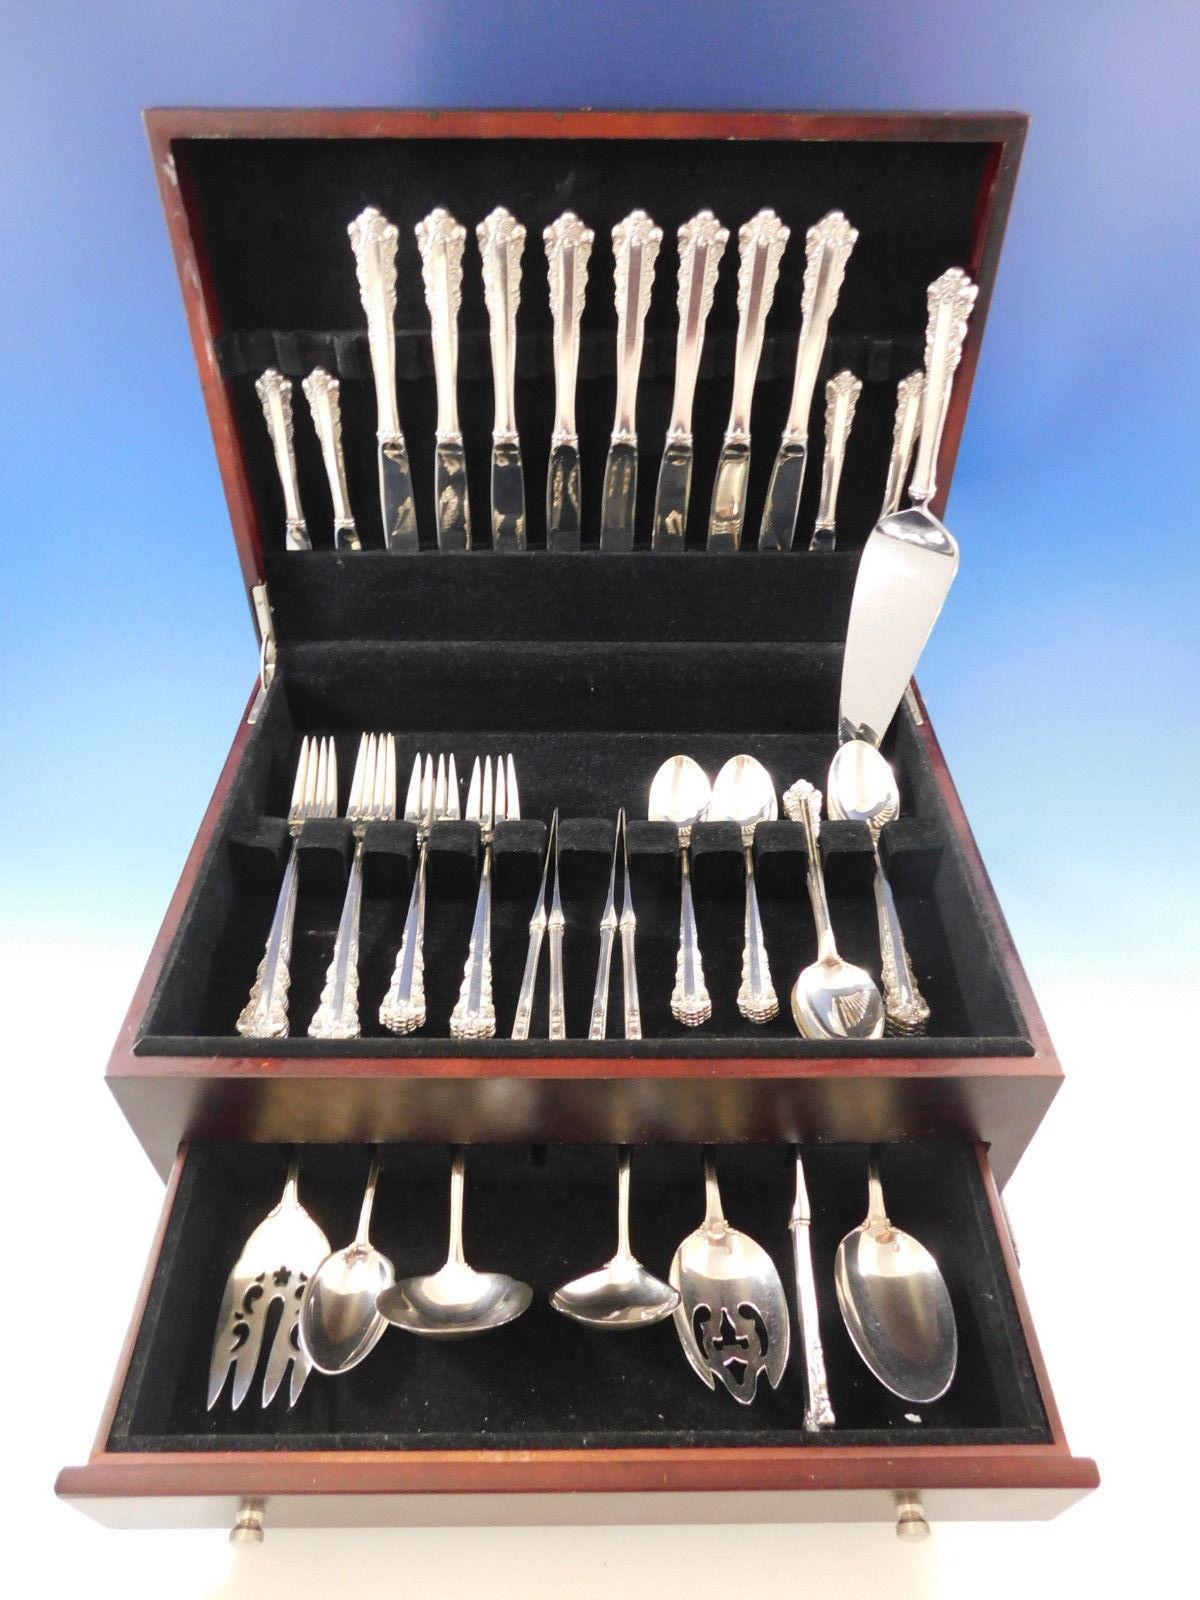 Belle Meade by Lunt sterling silver flatware set of 56 pieces. This set includes:

12 knives, 9 1/8